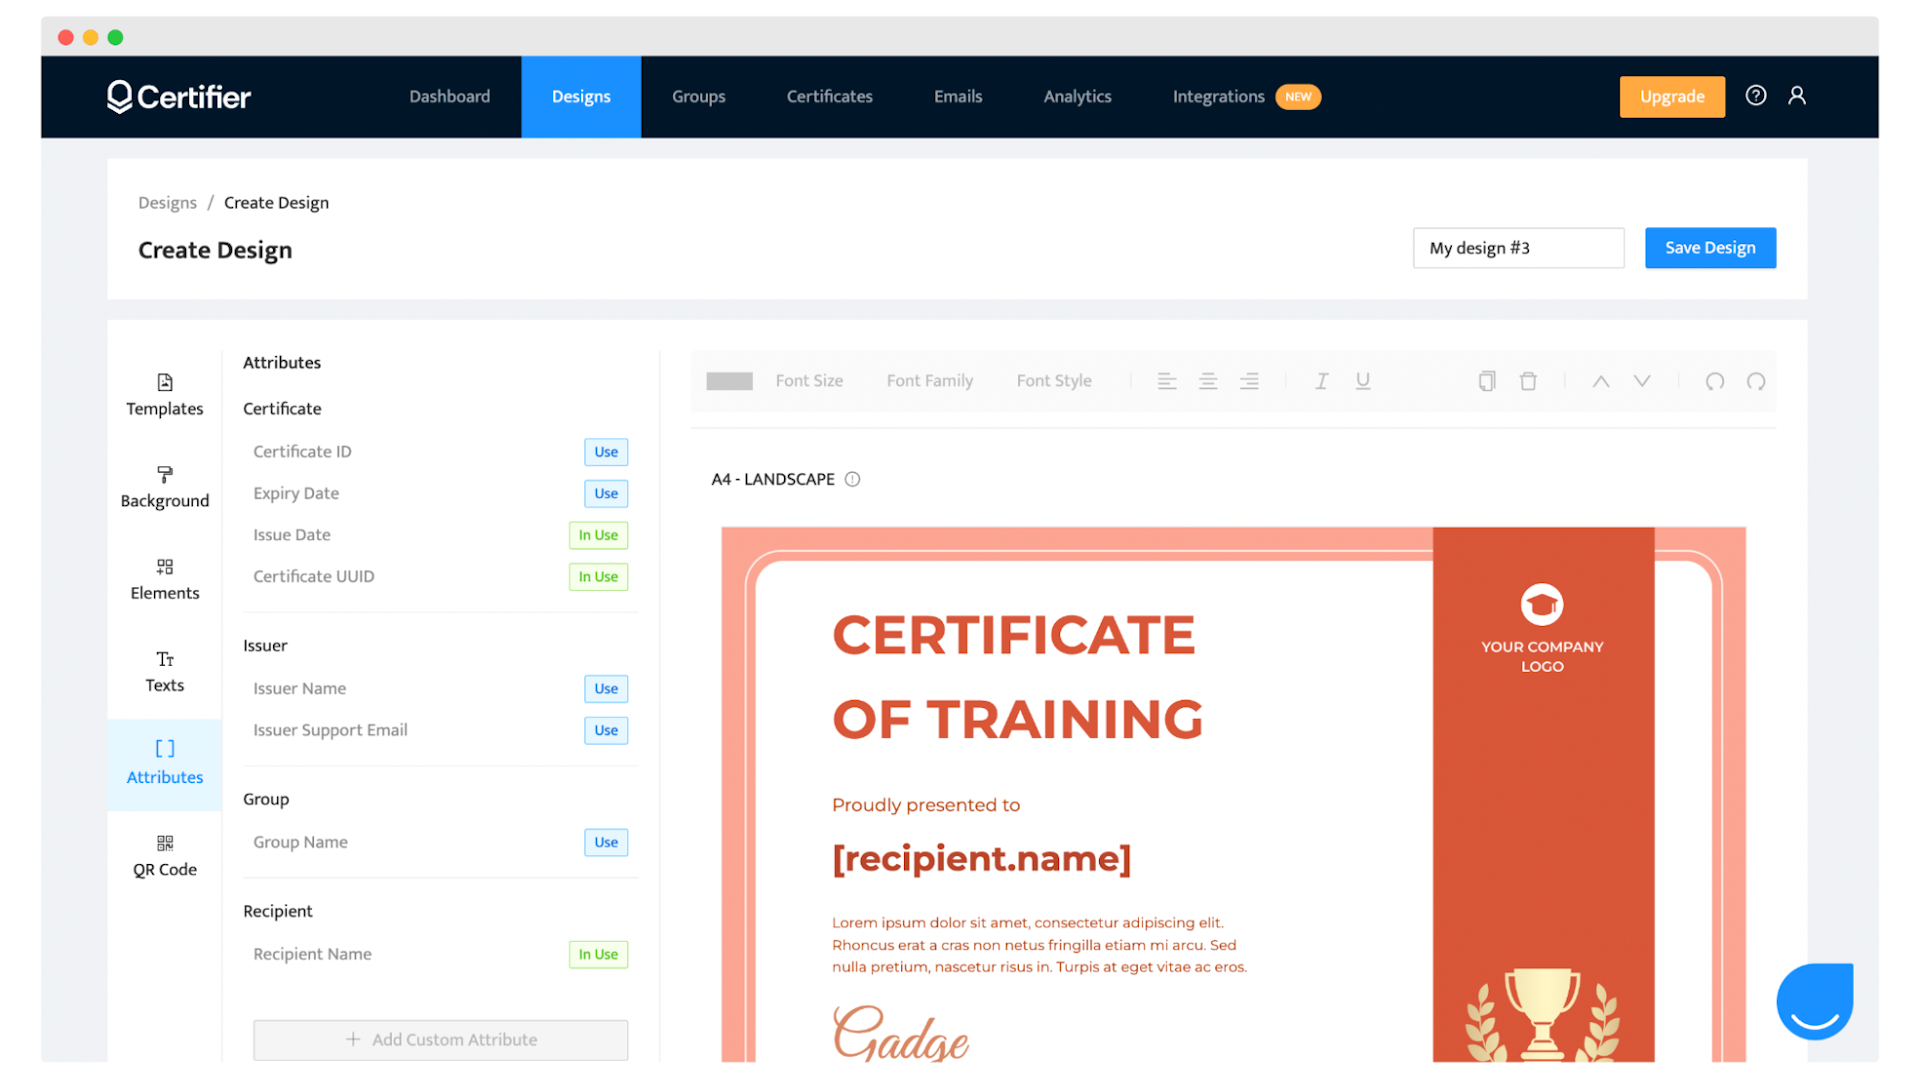 Certifier dashboard, a certificate software for eLearning automation and certificates.